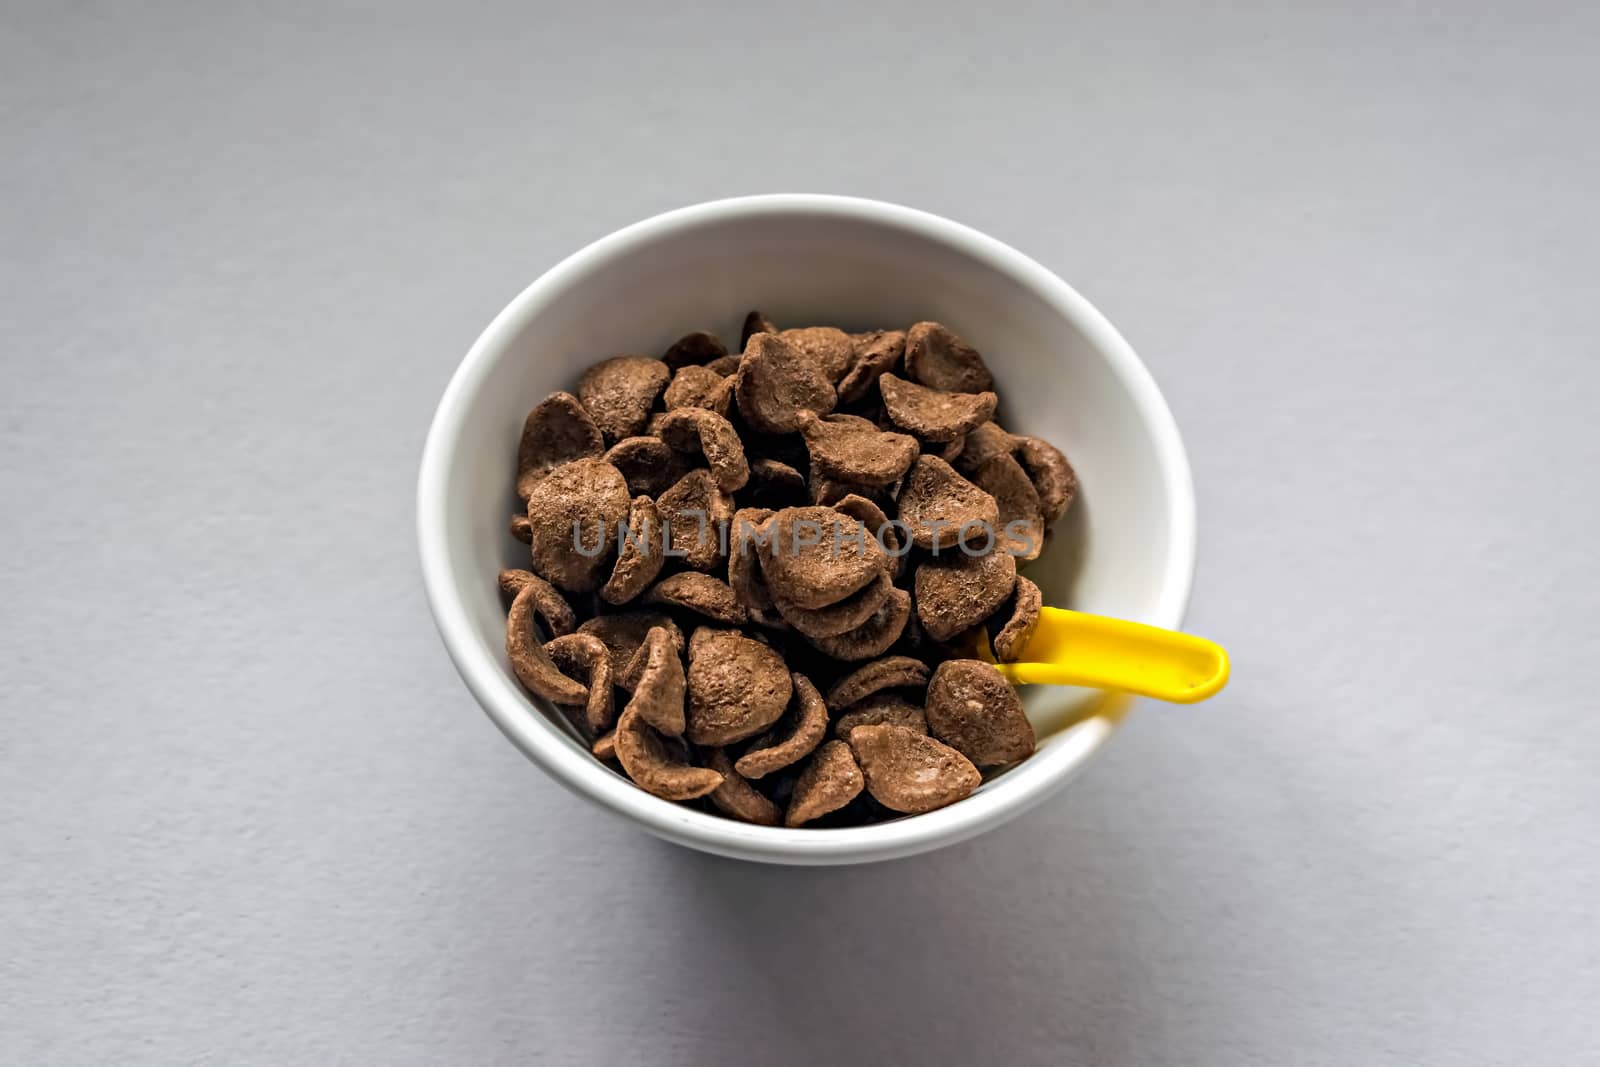 Selective focus image of Wheat & chocolate based cereal flakes in a white bowl with yellow spoon. Food ready to eat.